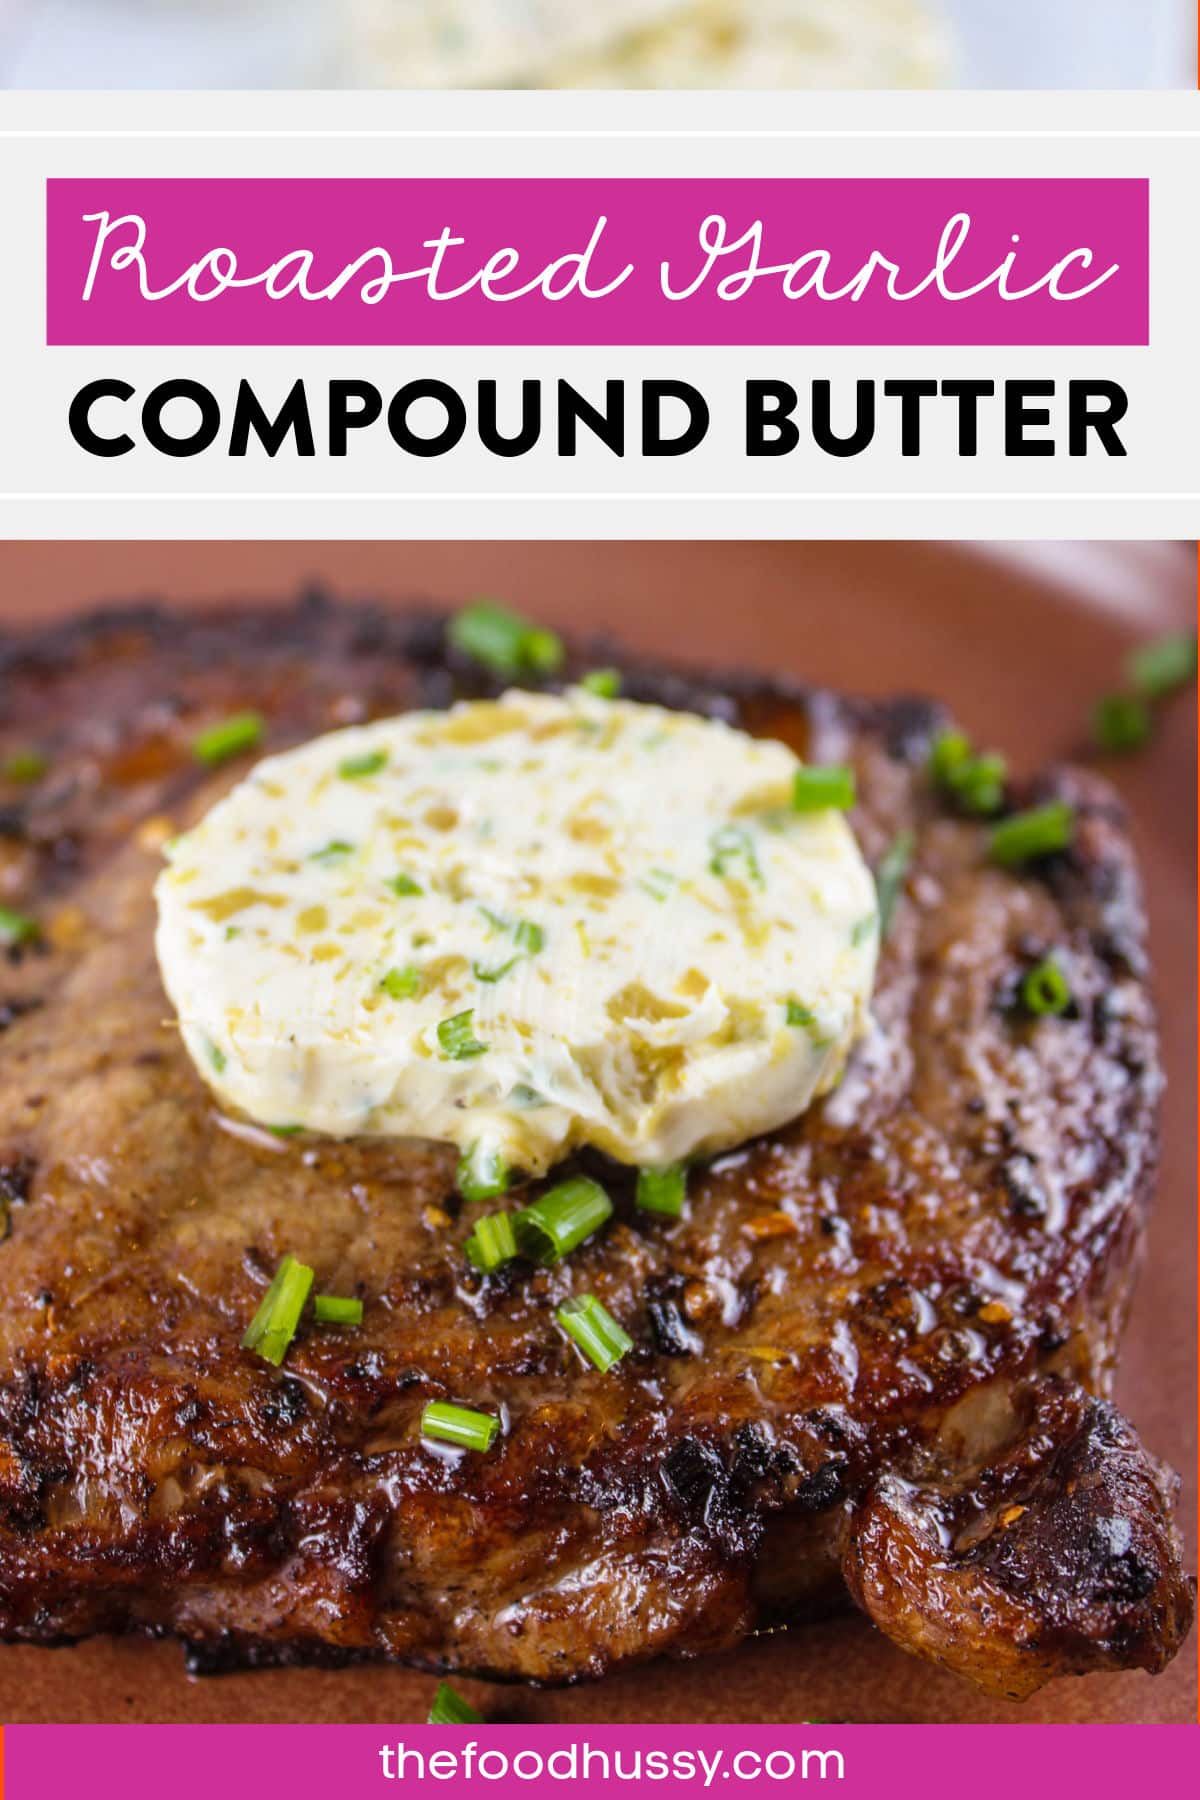 This Roasted Garlic Compound Butter is a delicious way to jazz up steaks, vegetables, garlic bread and more! It's a blend of butter, roasted garlic and fresh chives. So delicious! via @foodhussy